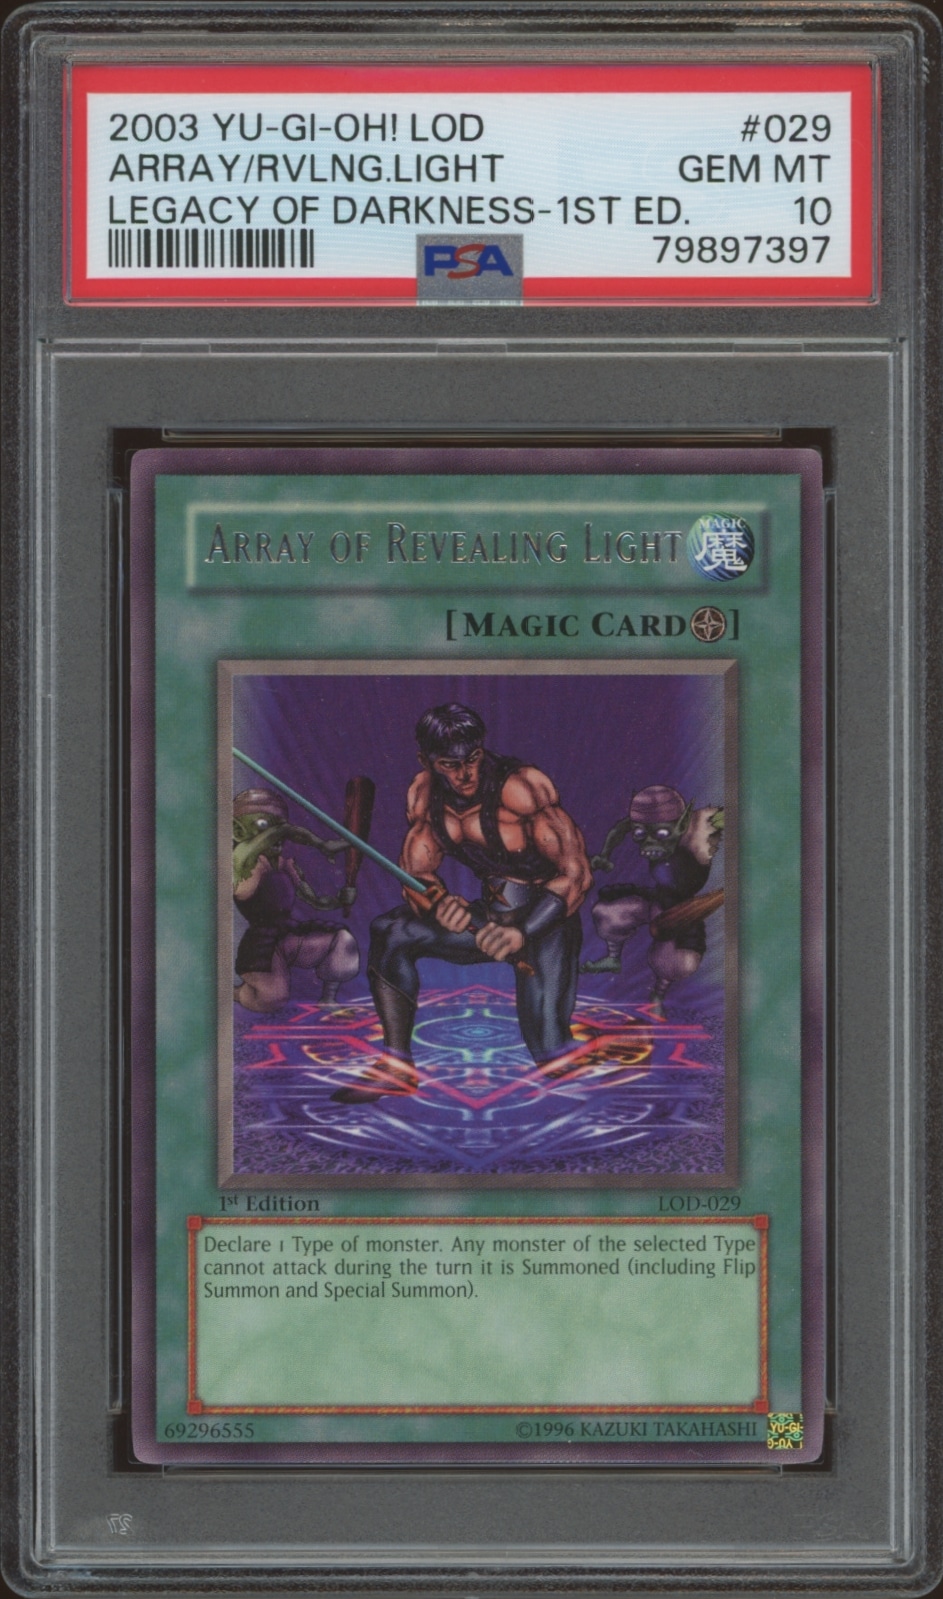 PSA 10 graded, 1st Edition Yu-Gi-Oh! Array of Revealing Light card from Legacy of Darkness set.